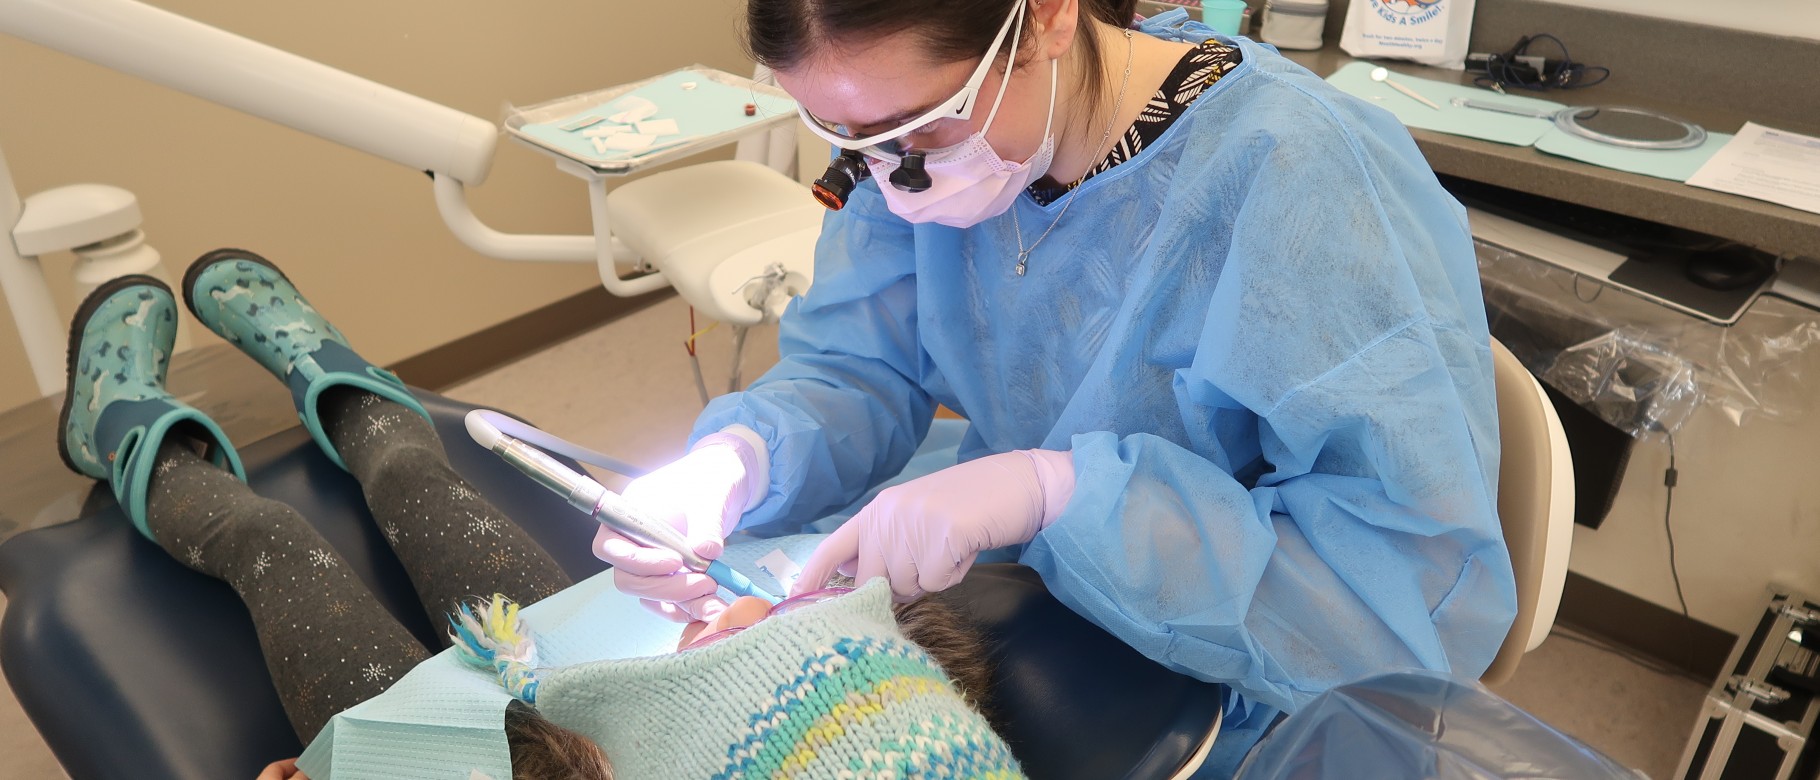 Dental student Emily Richard provides a cleaning during the Give Kids A Smile event